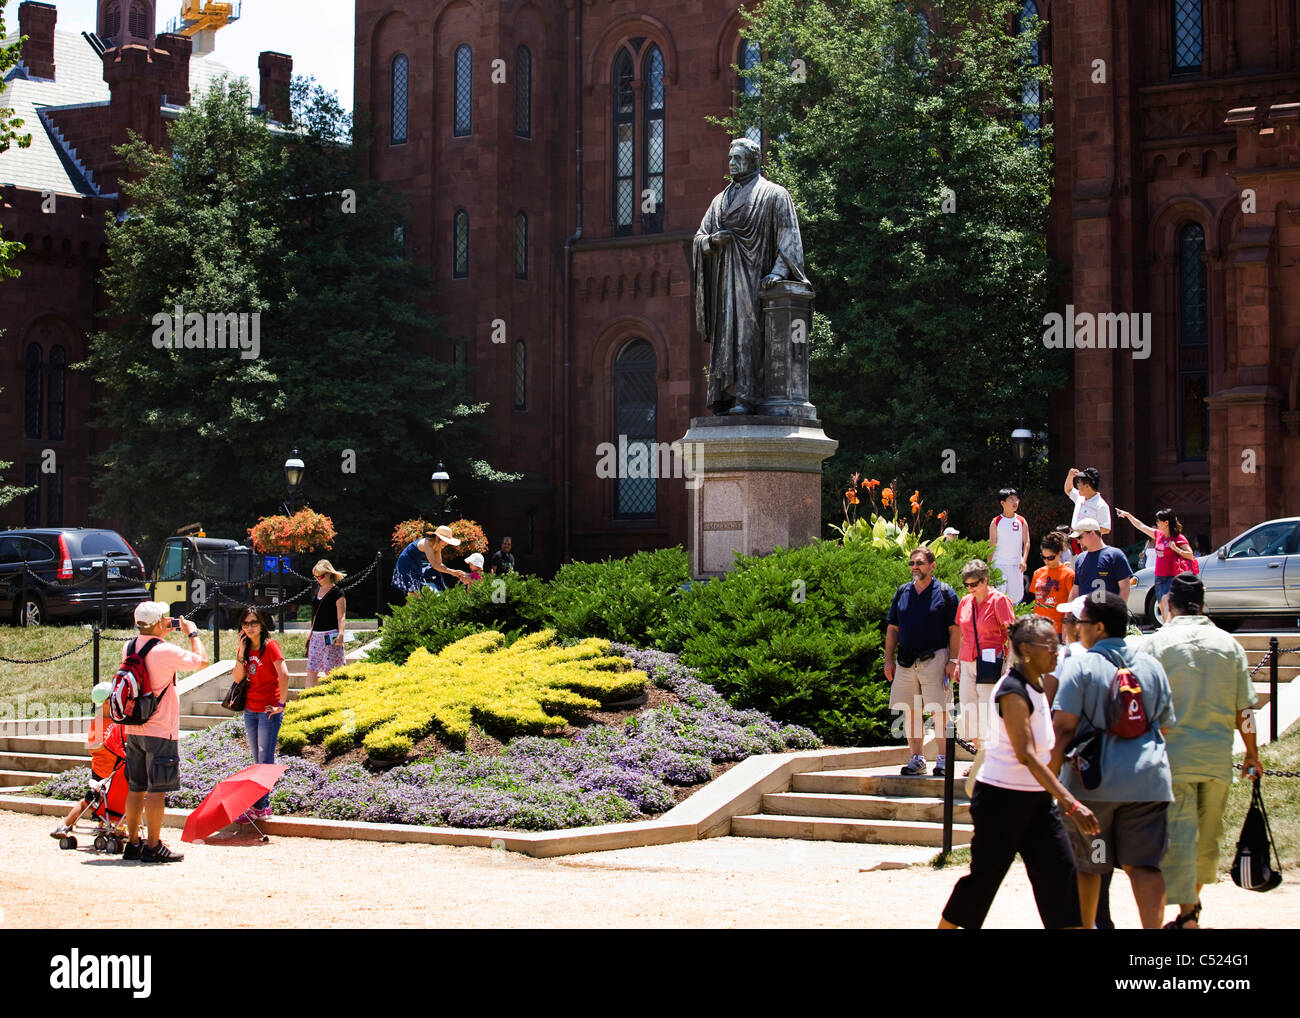 Tourists taking photos in front of the Joseph Henry statue - The Smithsonian, Washington, DC USA Stock Photo